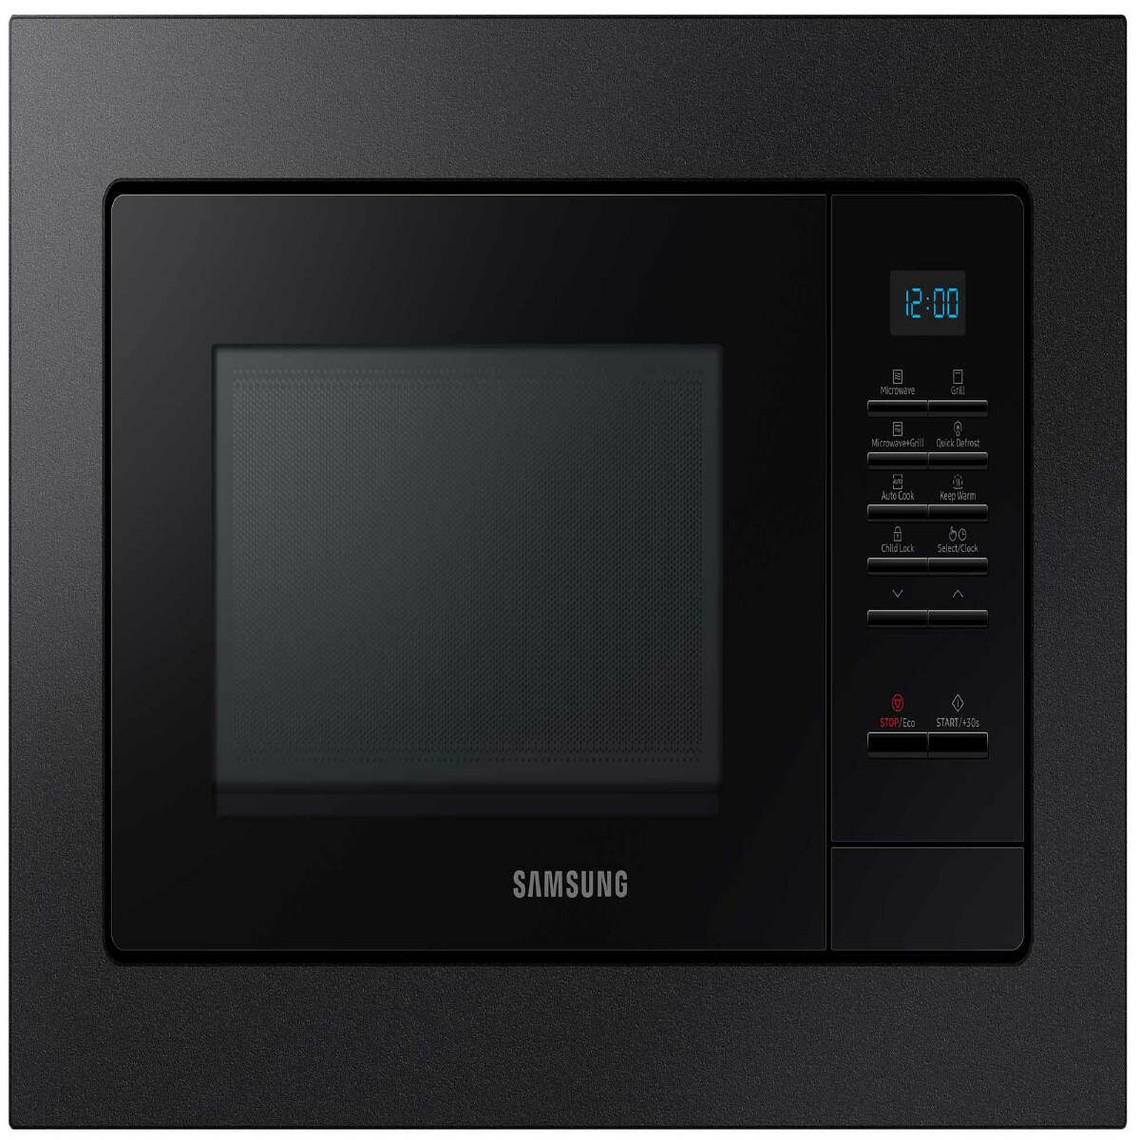 Samsung Micro ondes Grill Encastrable MG20A7013CB